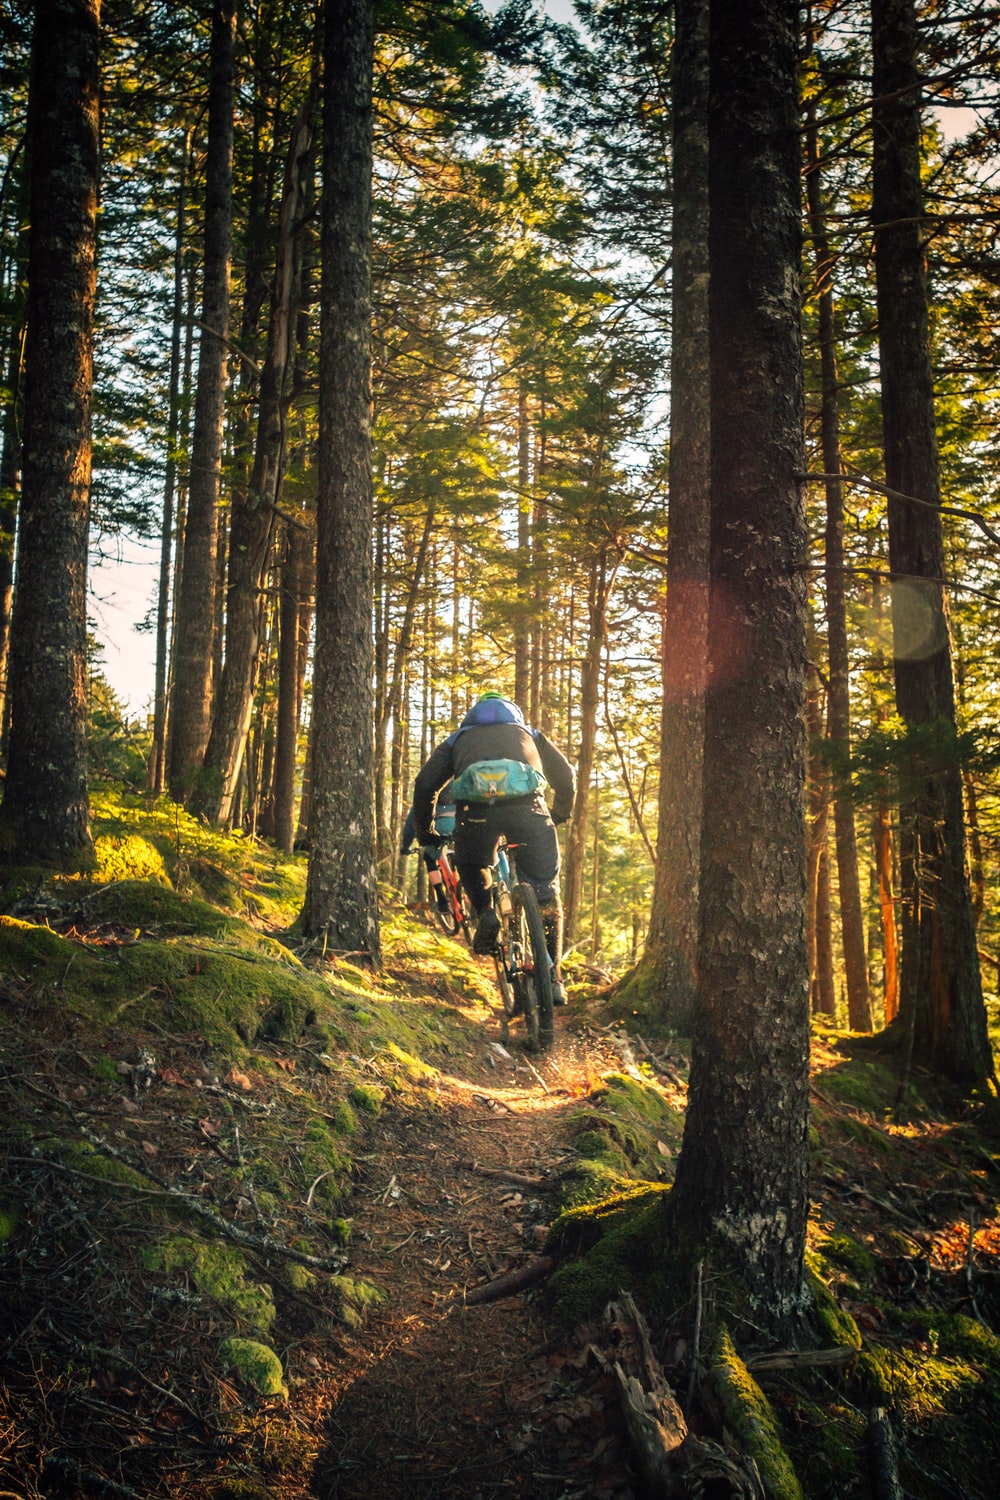 Mountain Bike Picture. Download Free Image